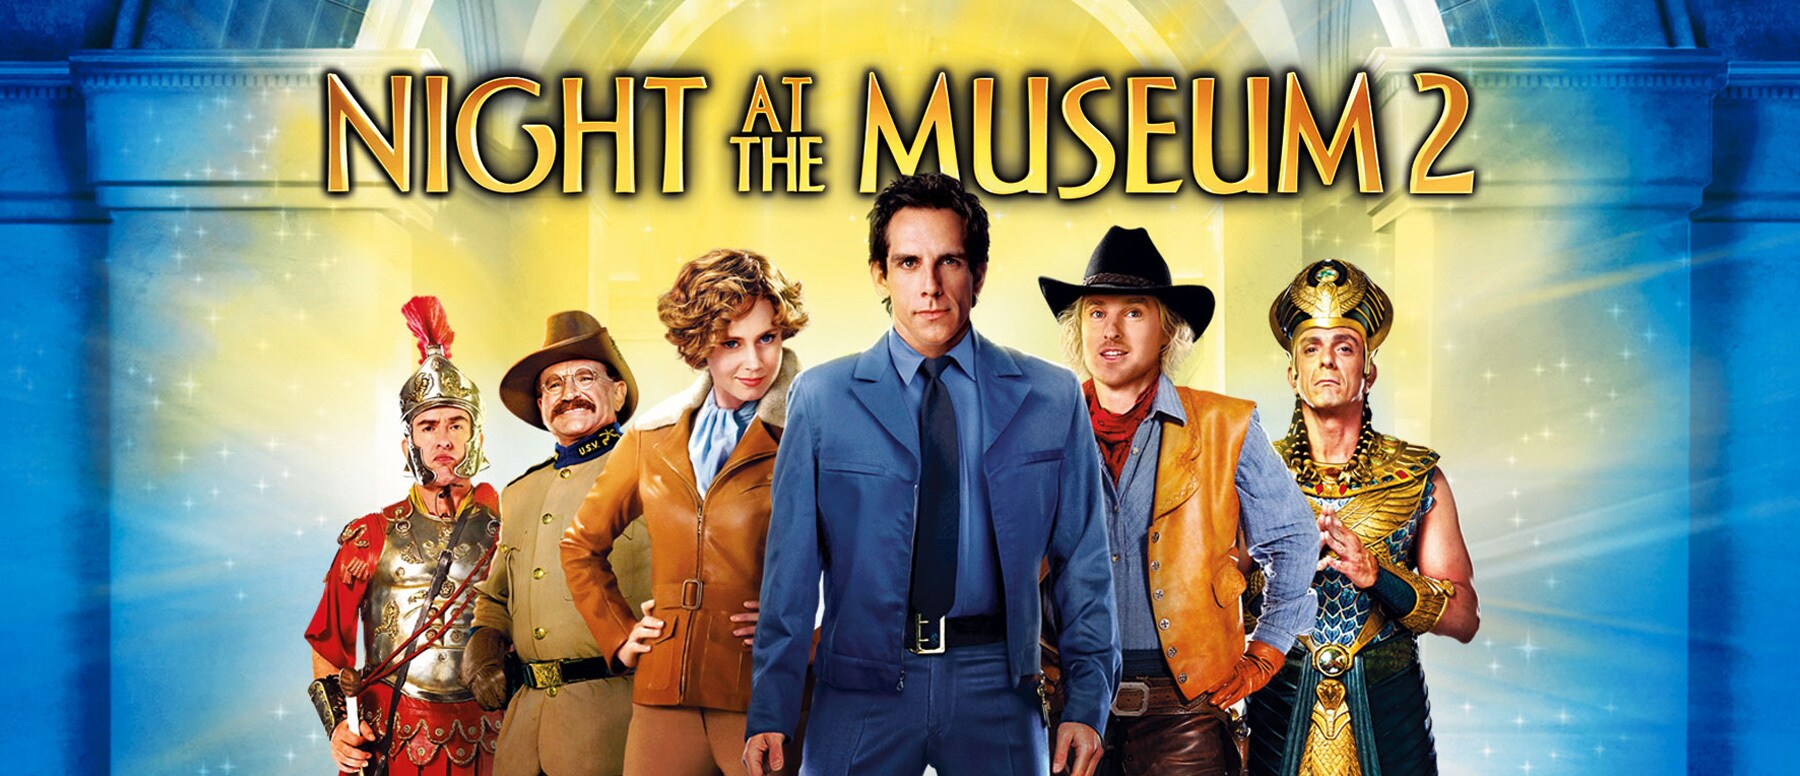 Night at the museum battle of the smithsonian release date Pcnxjacbxxtum